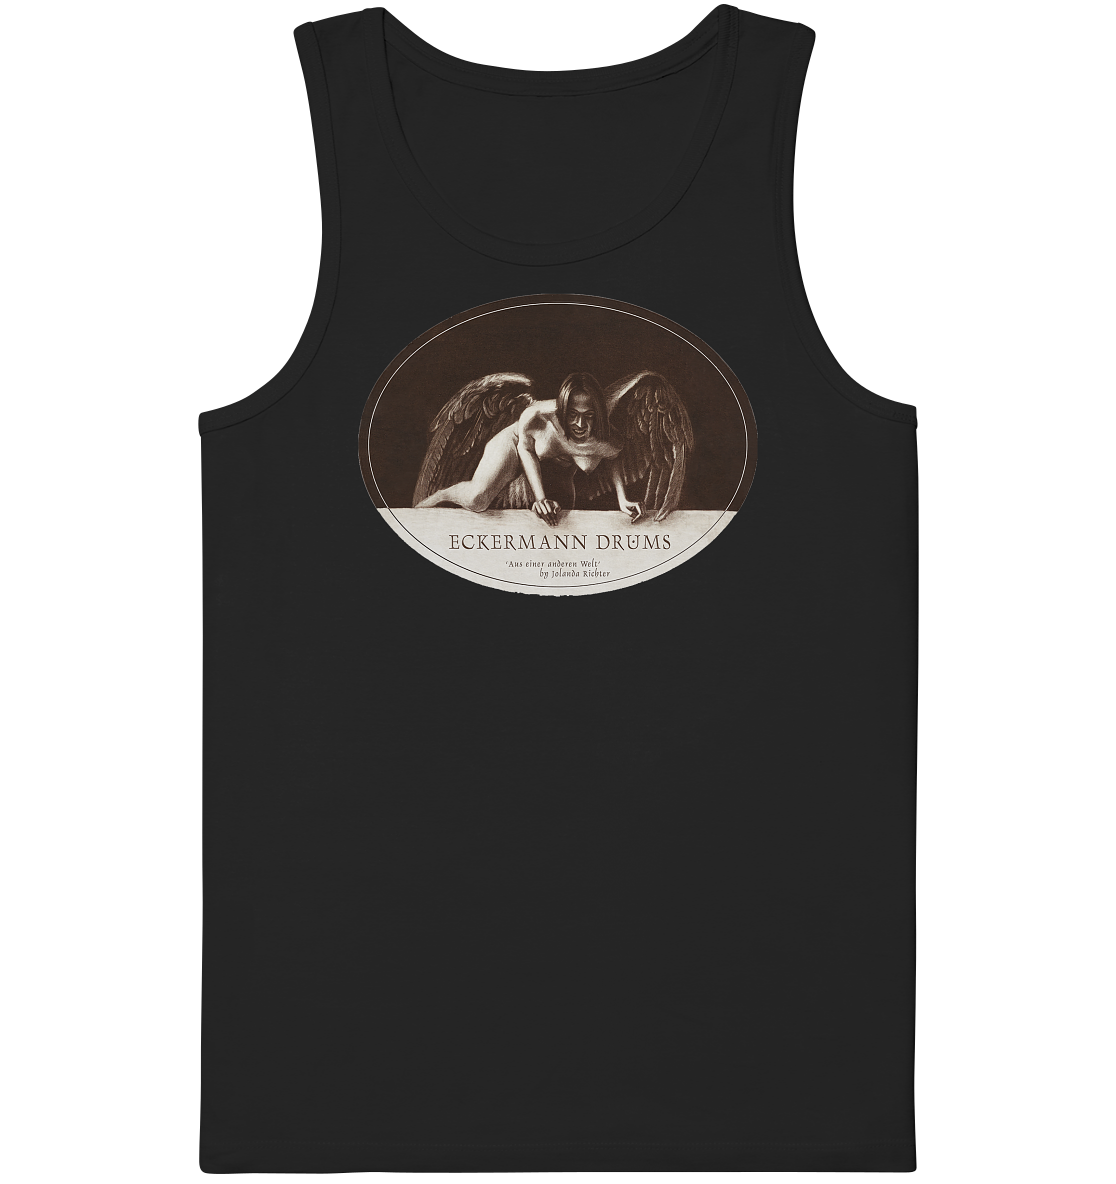 Eckermann DRUMS - "From Another World" - Organic Tank-Top